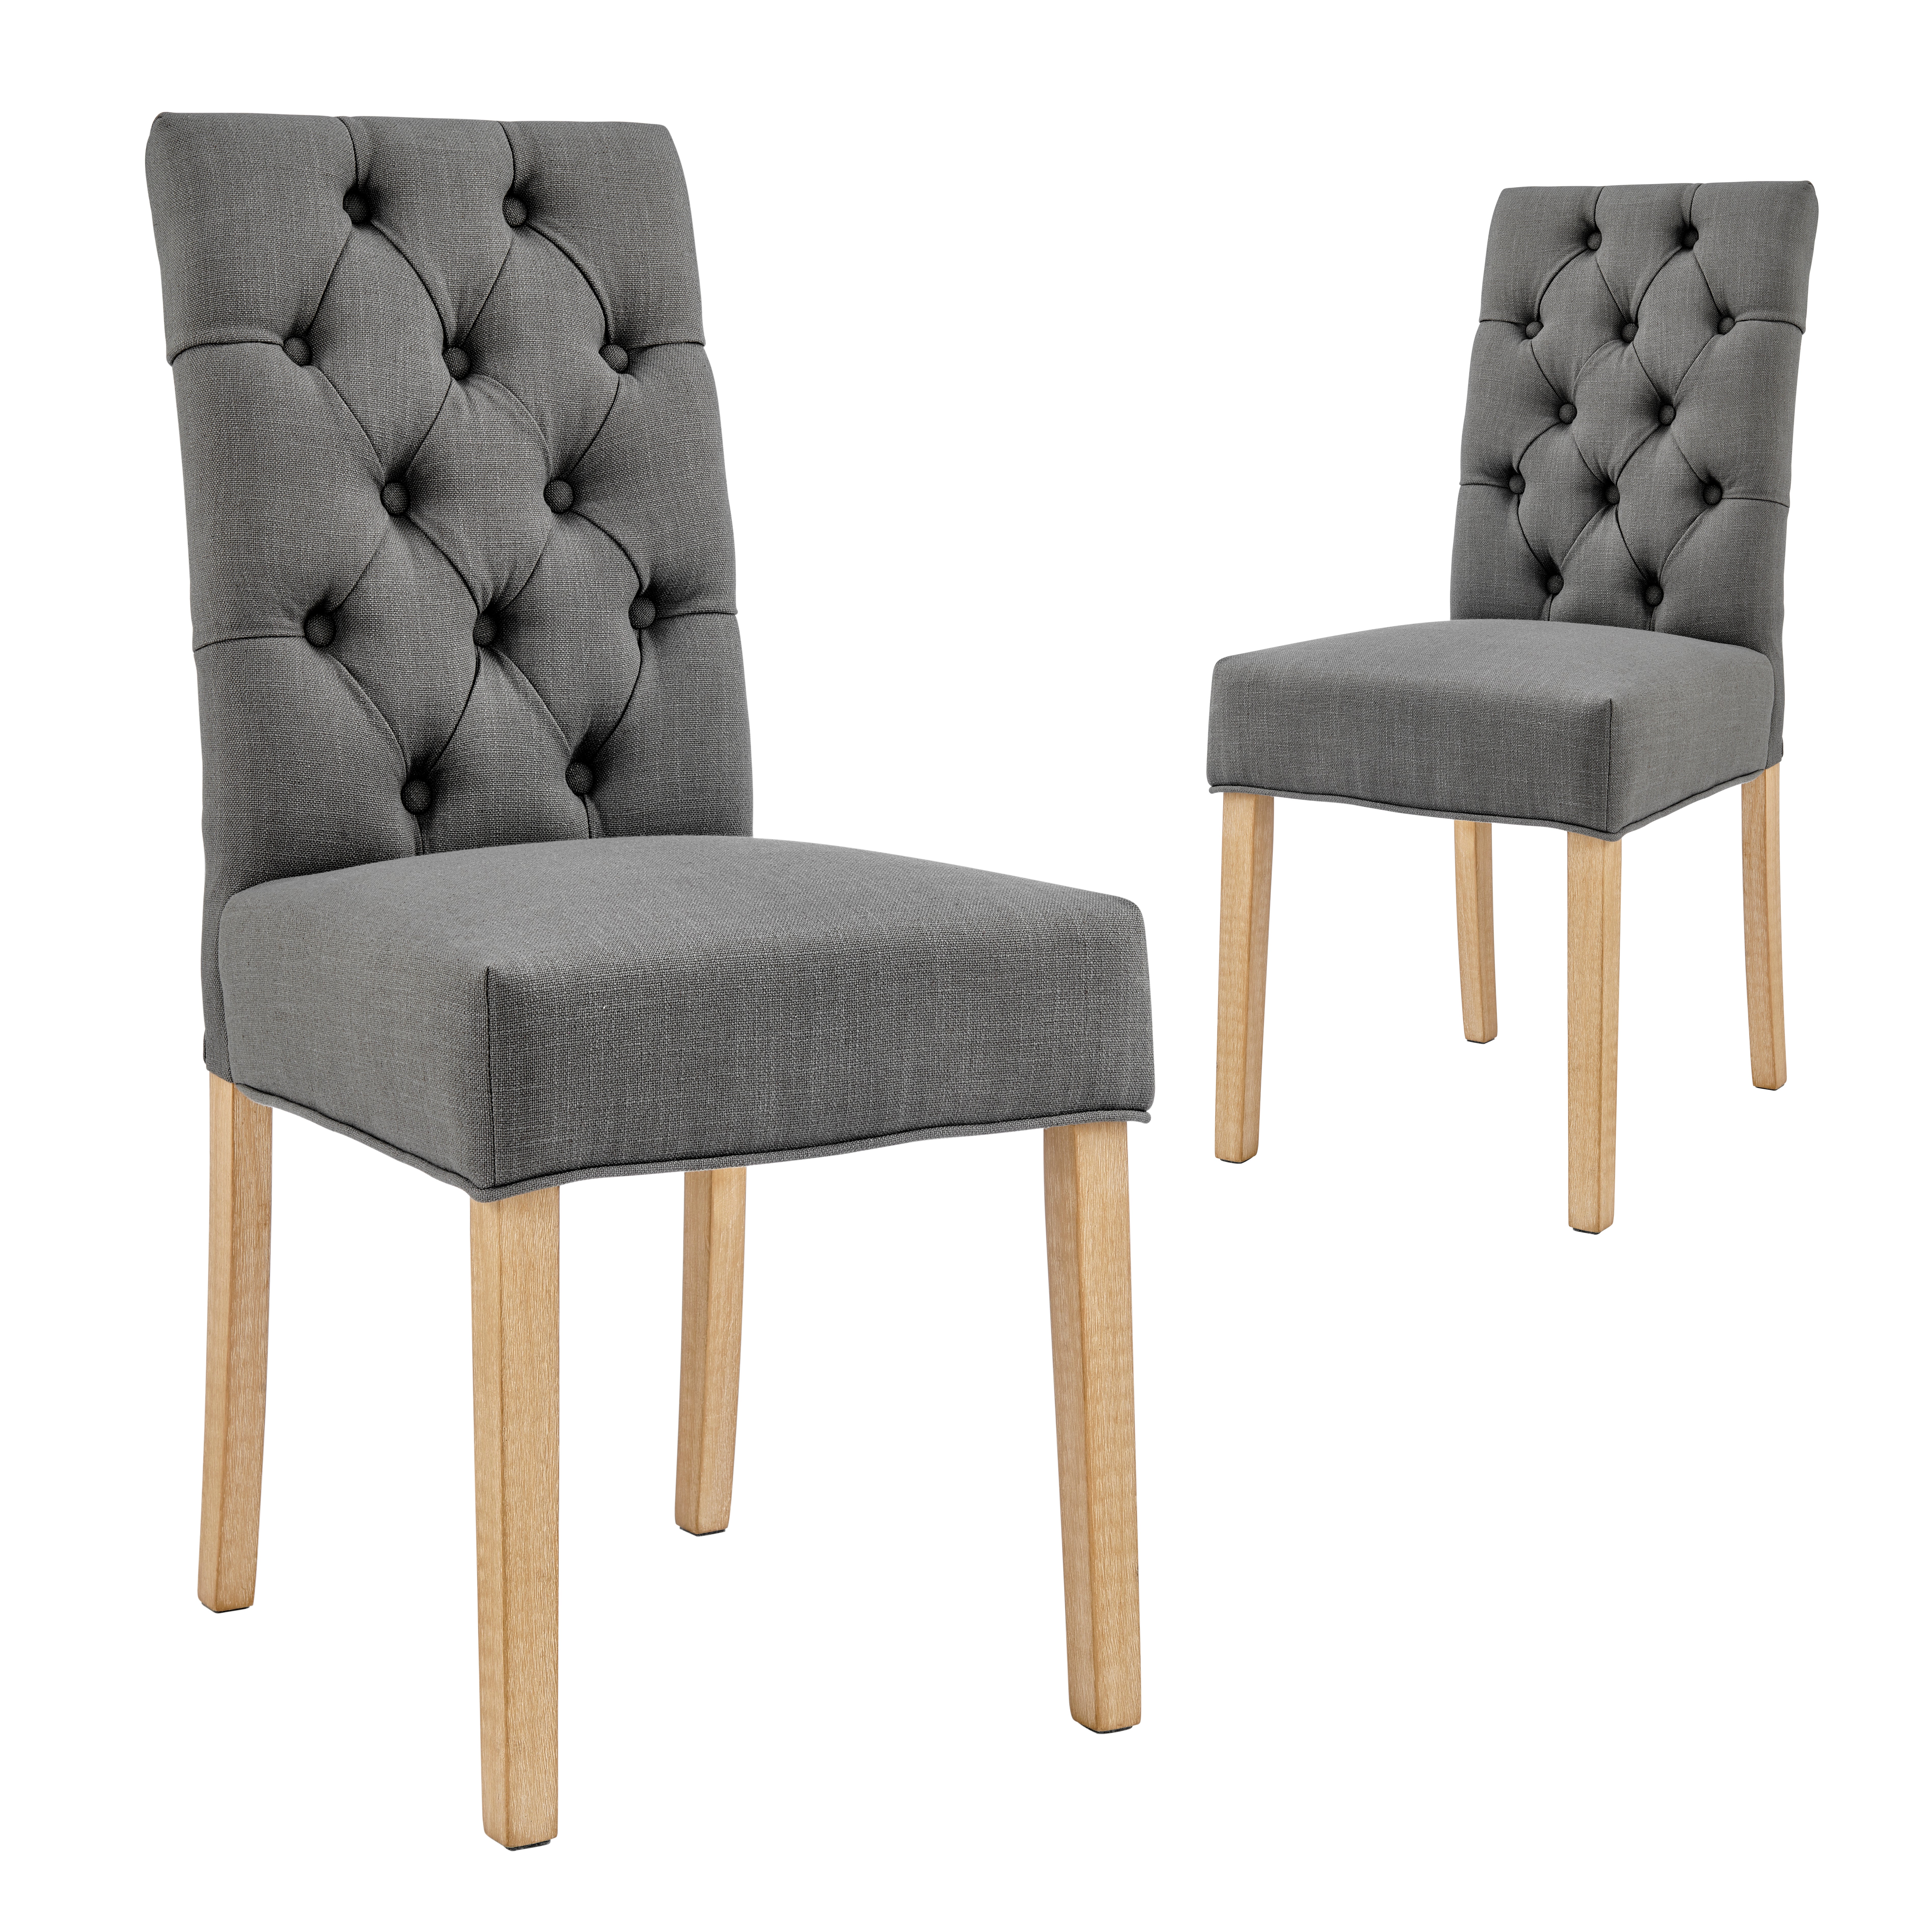 DukeLiving Sheffield Linen Dining Chairs Grey (Set of 2)